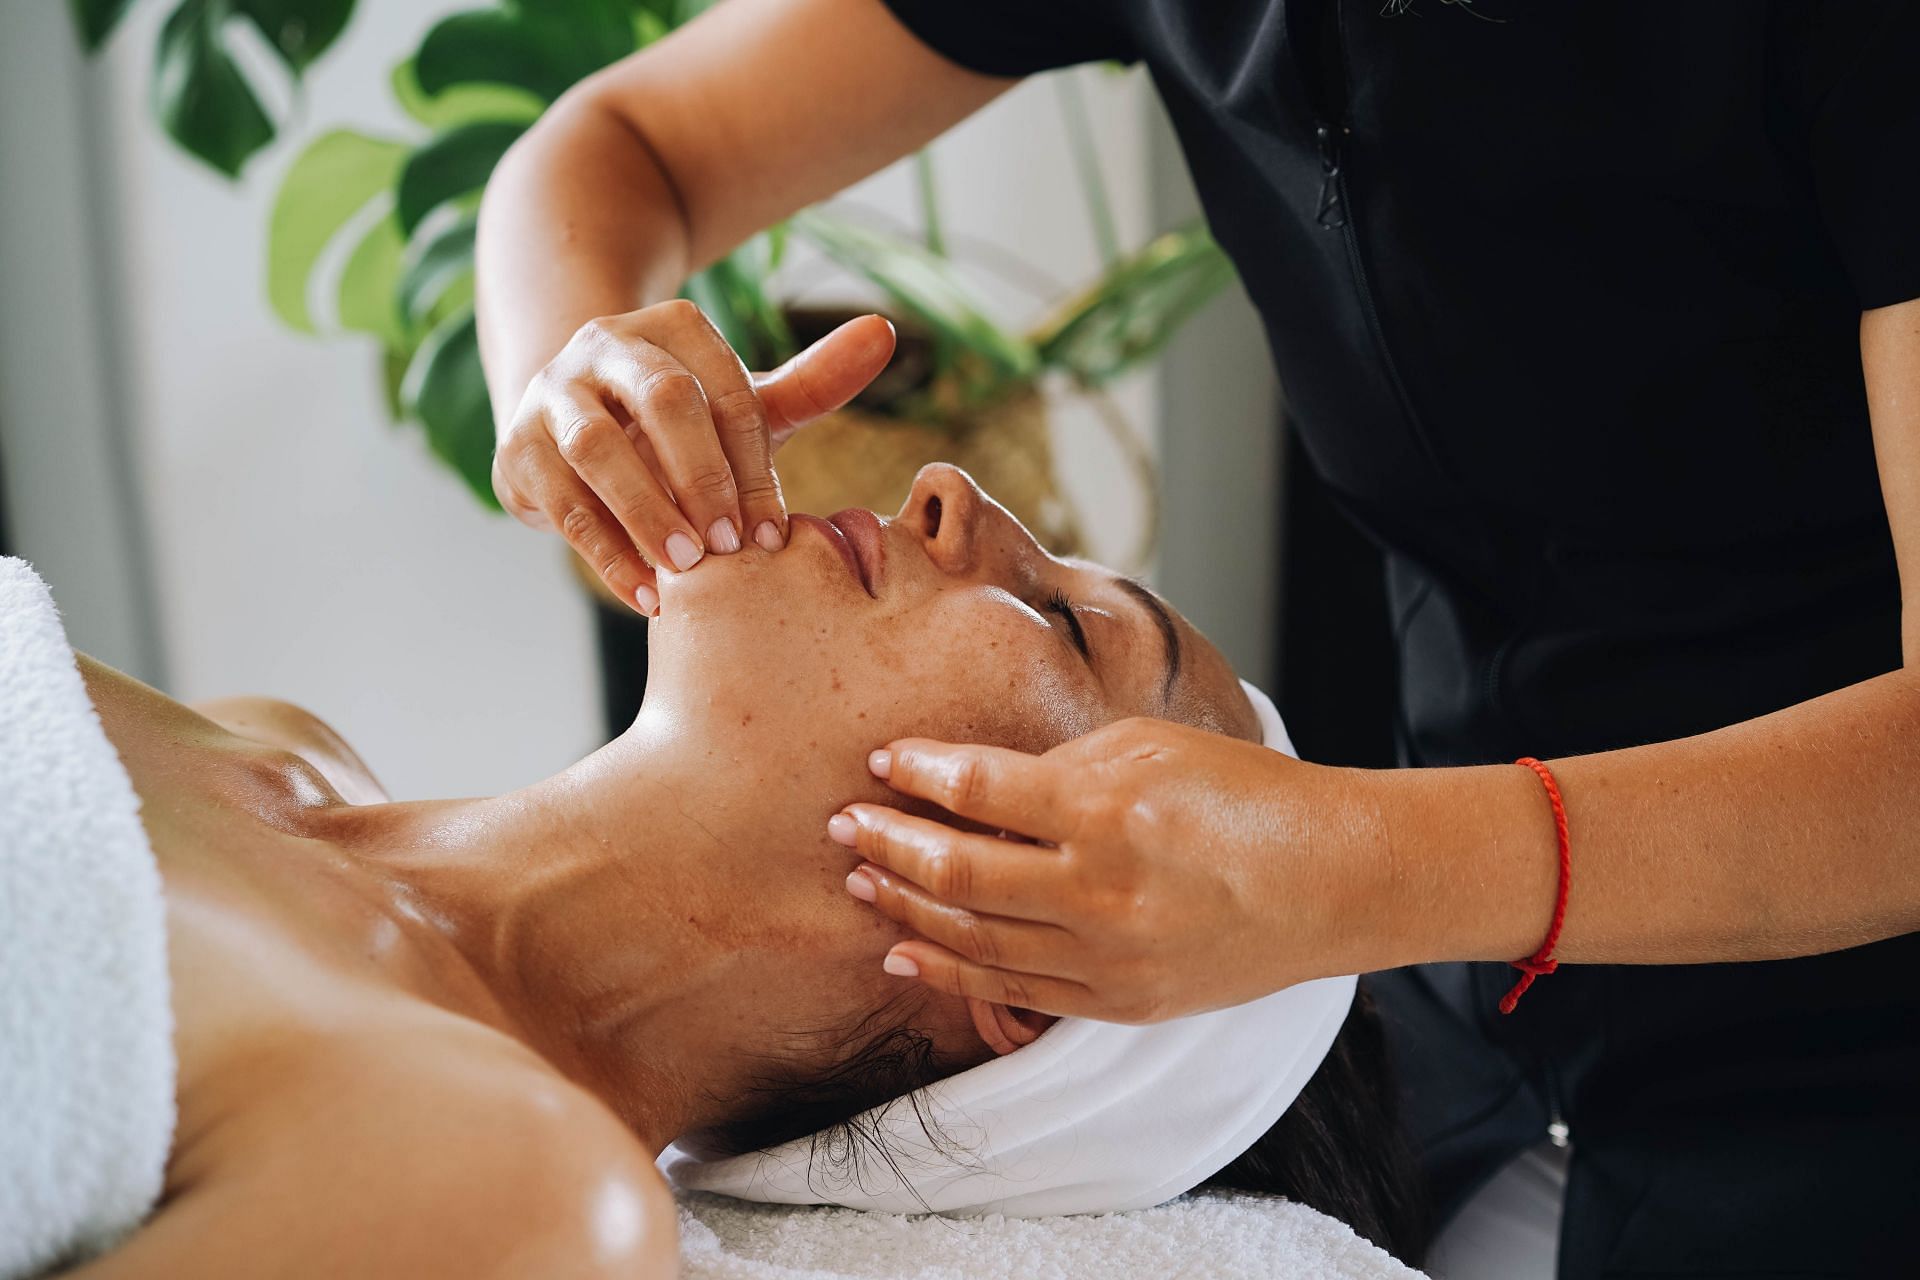 Importance of understanding buccal massage benefits (image sourced via Pexels / Photo by olia denilevich)